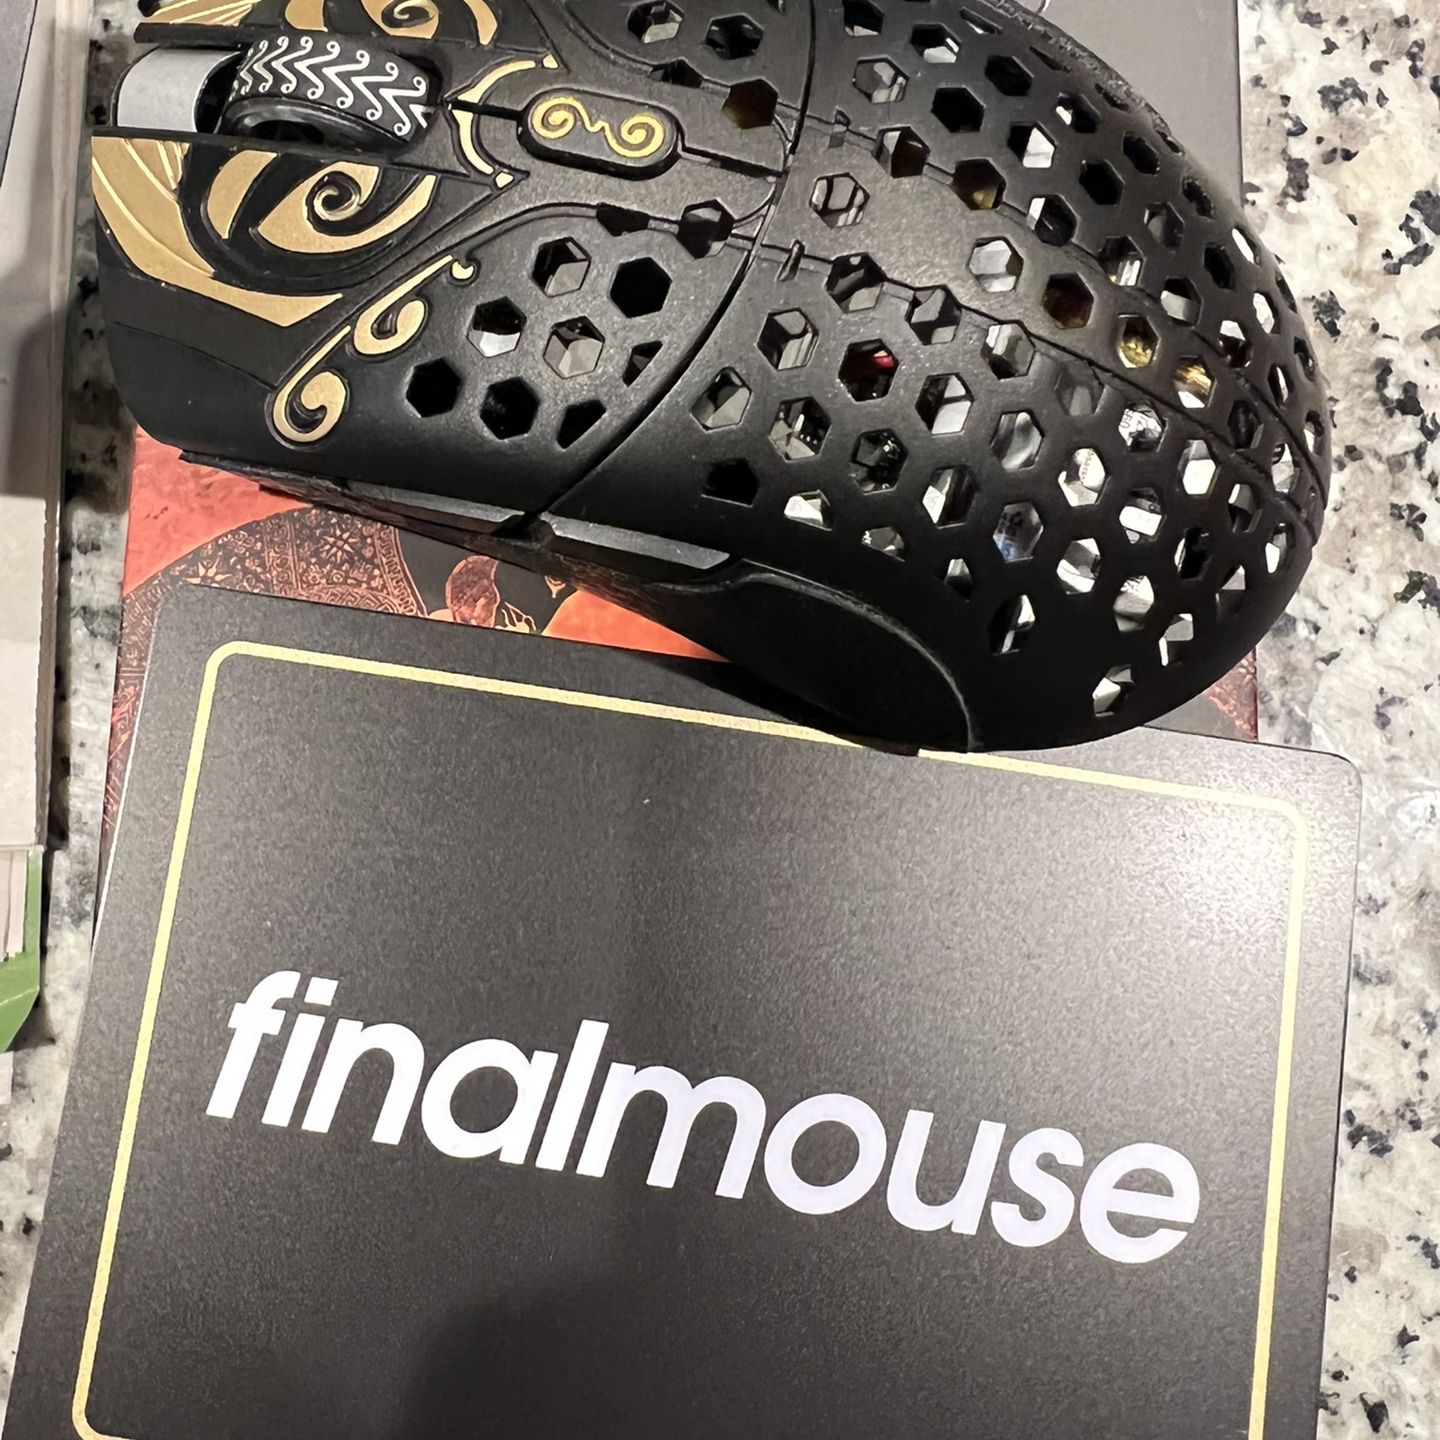 Finalmouse Starlight-12 Hades for Sale in Rosemead, CA - OfferUp